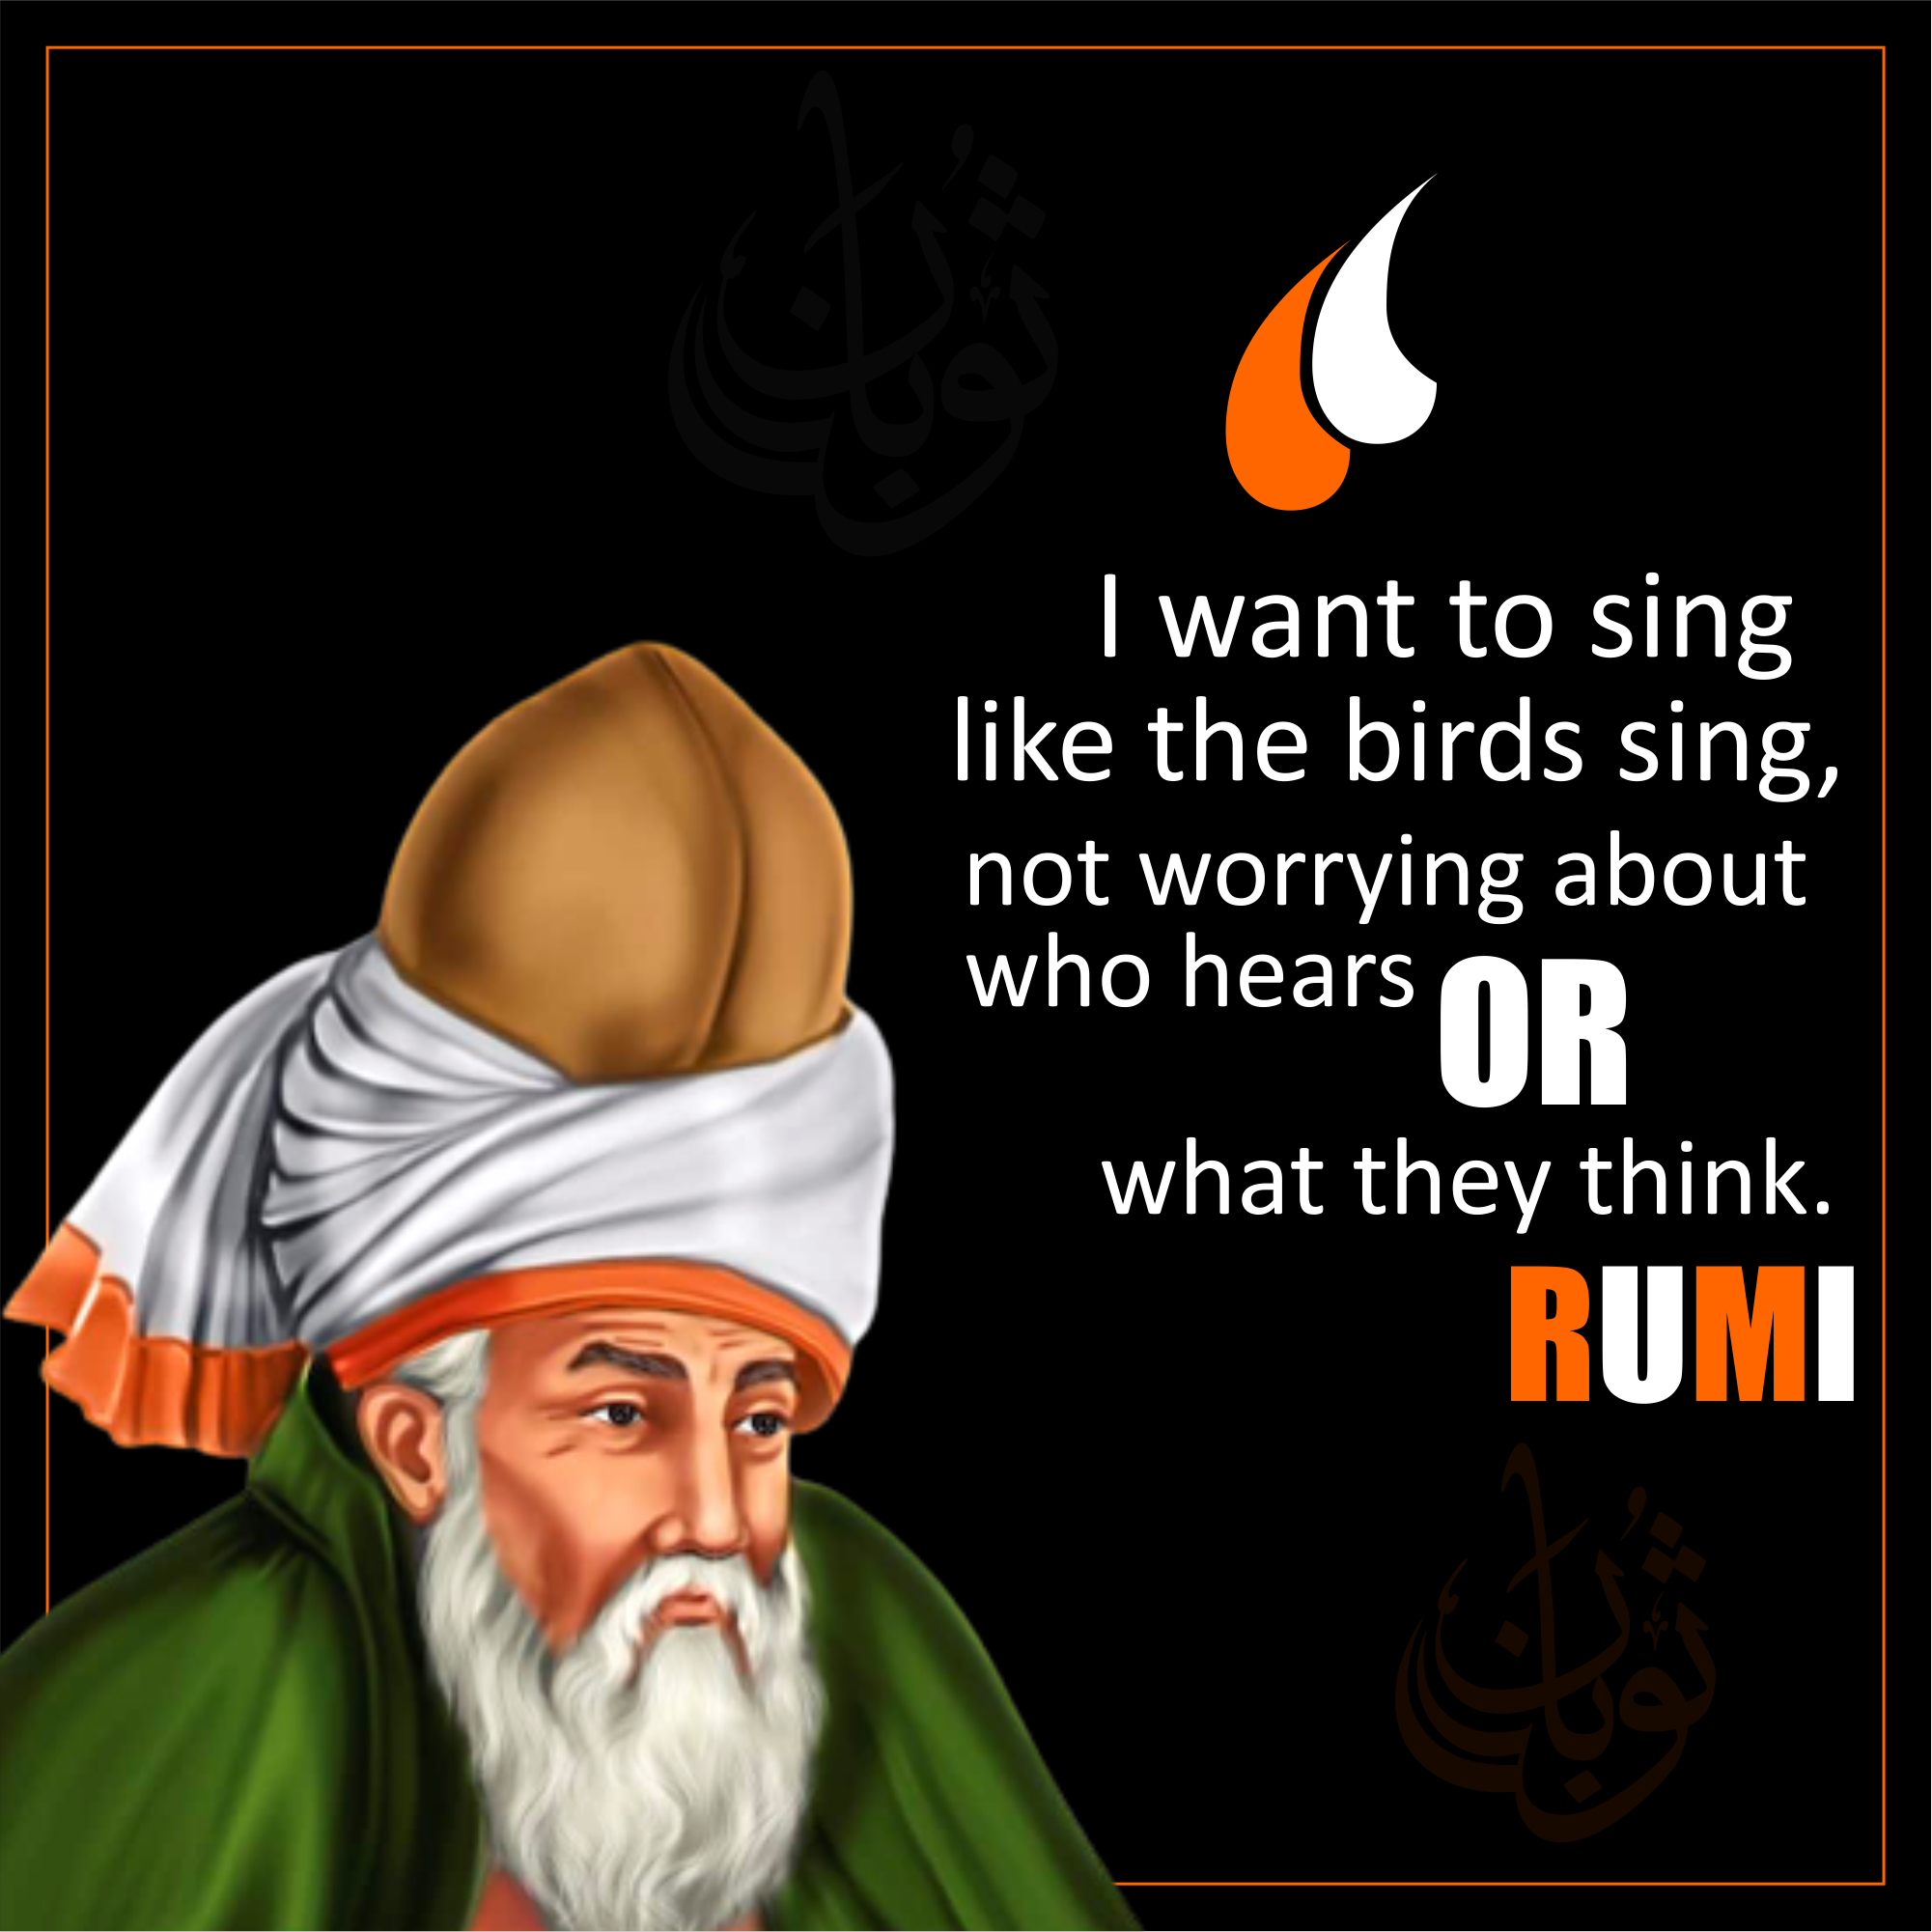 20 MOST FAMOUS QUOTES OF RUMI